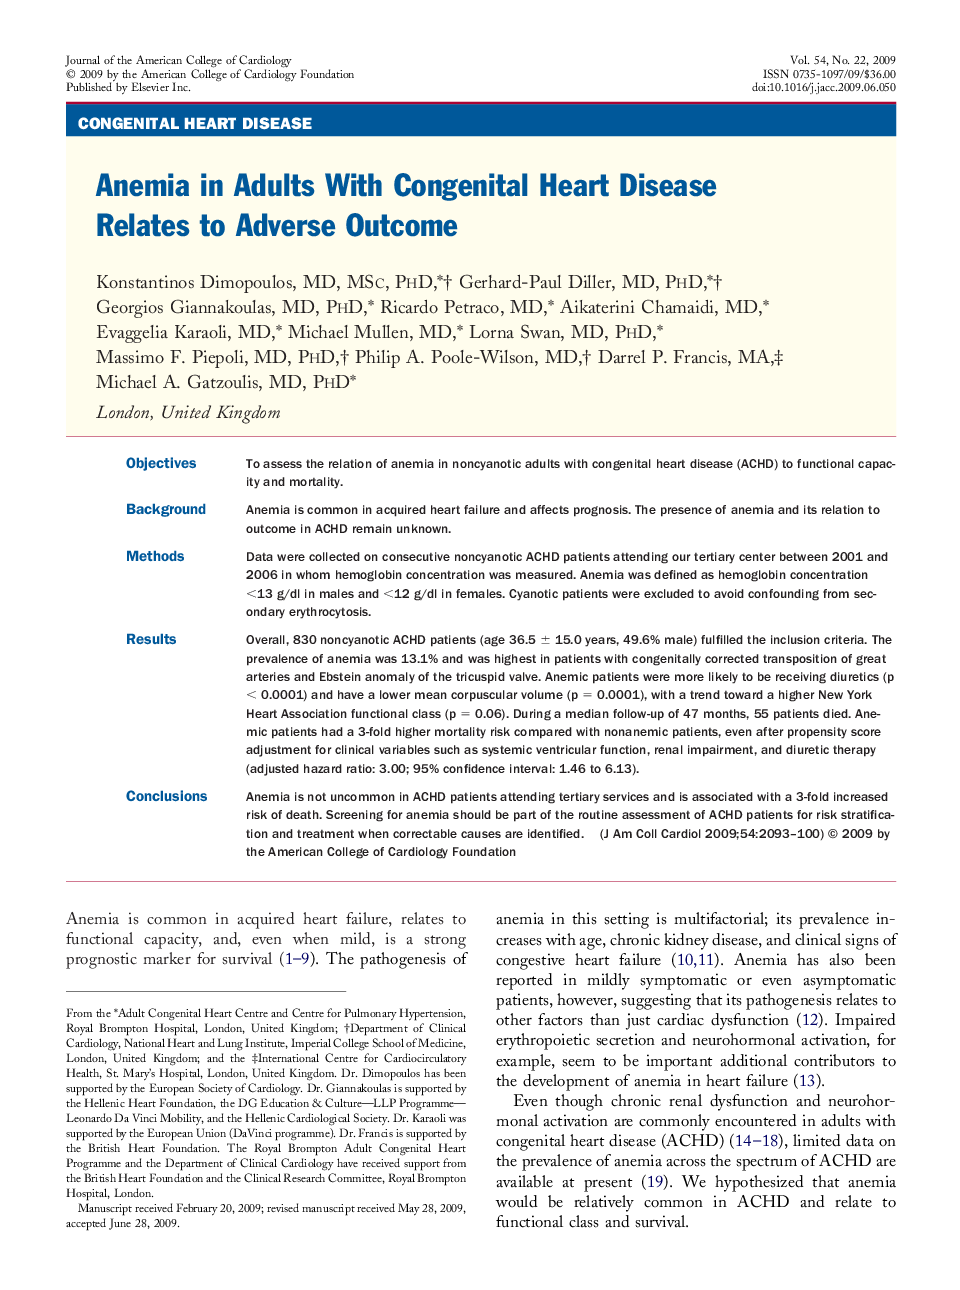 Anemia in Adults With Congenital Heart Disease Relates to Adverse Outcome 